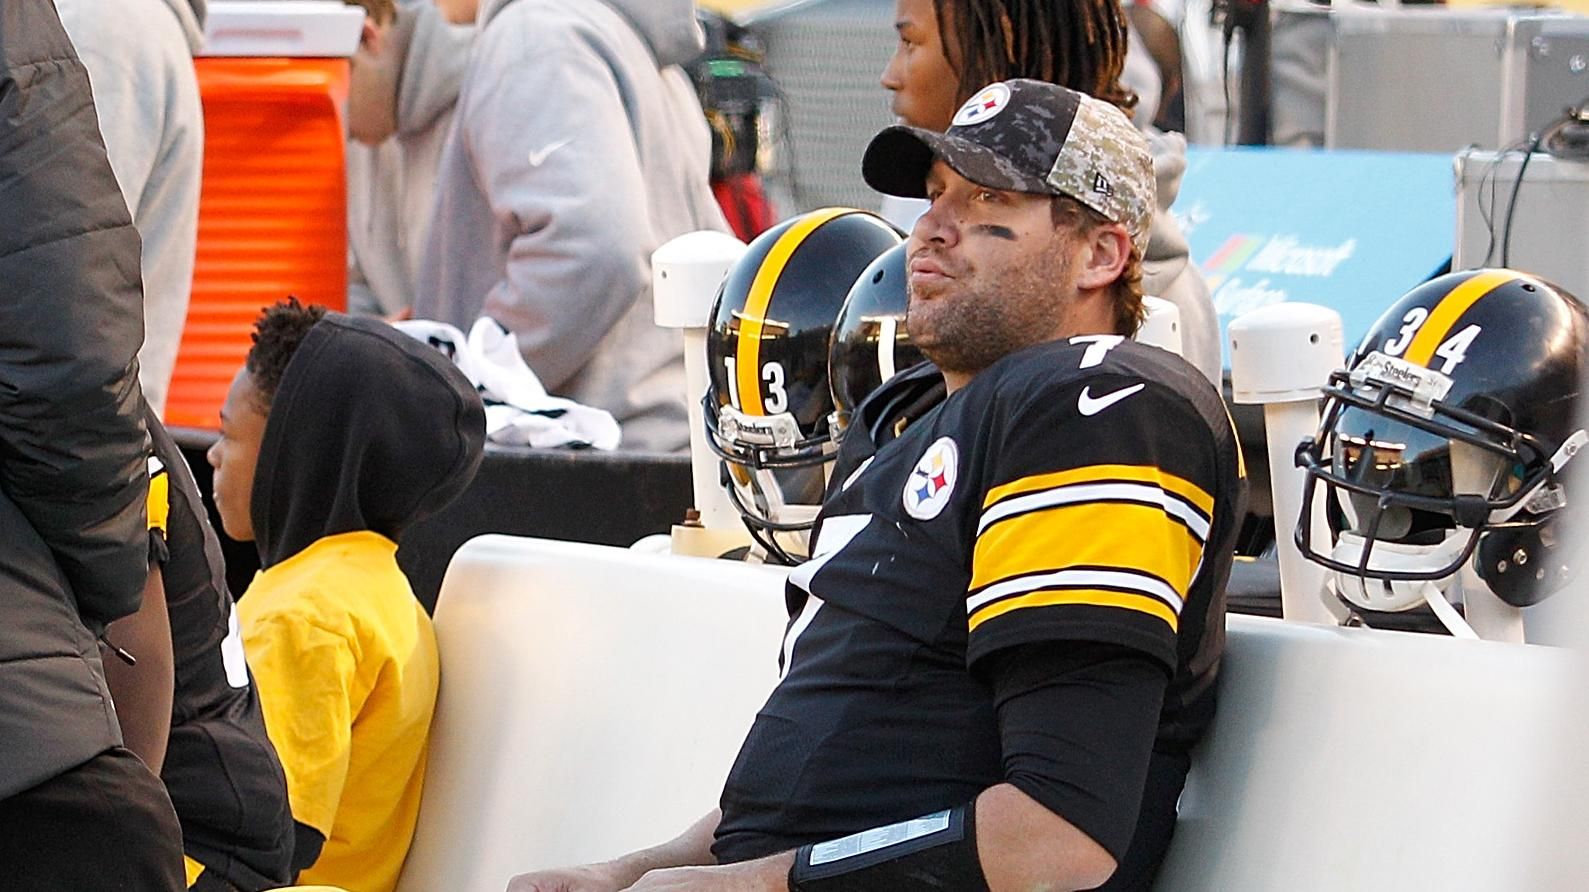 Expect Roethlisberger to be limited if he does play